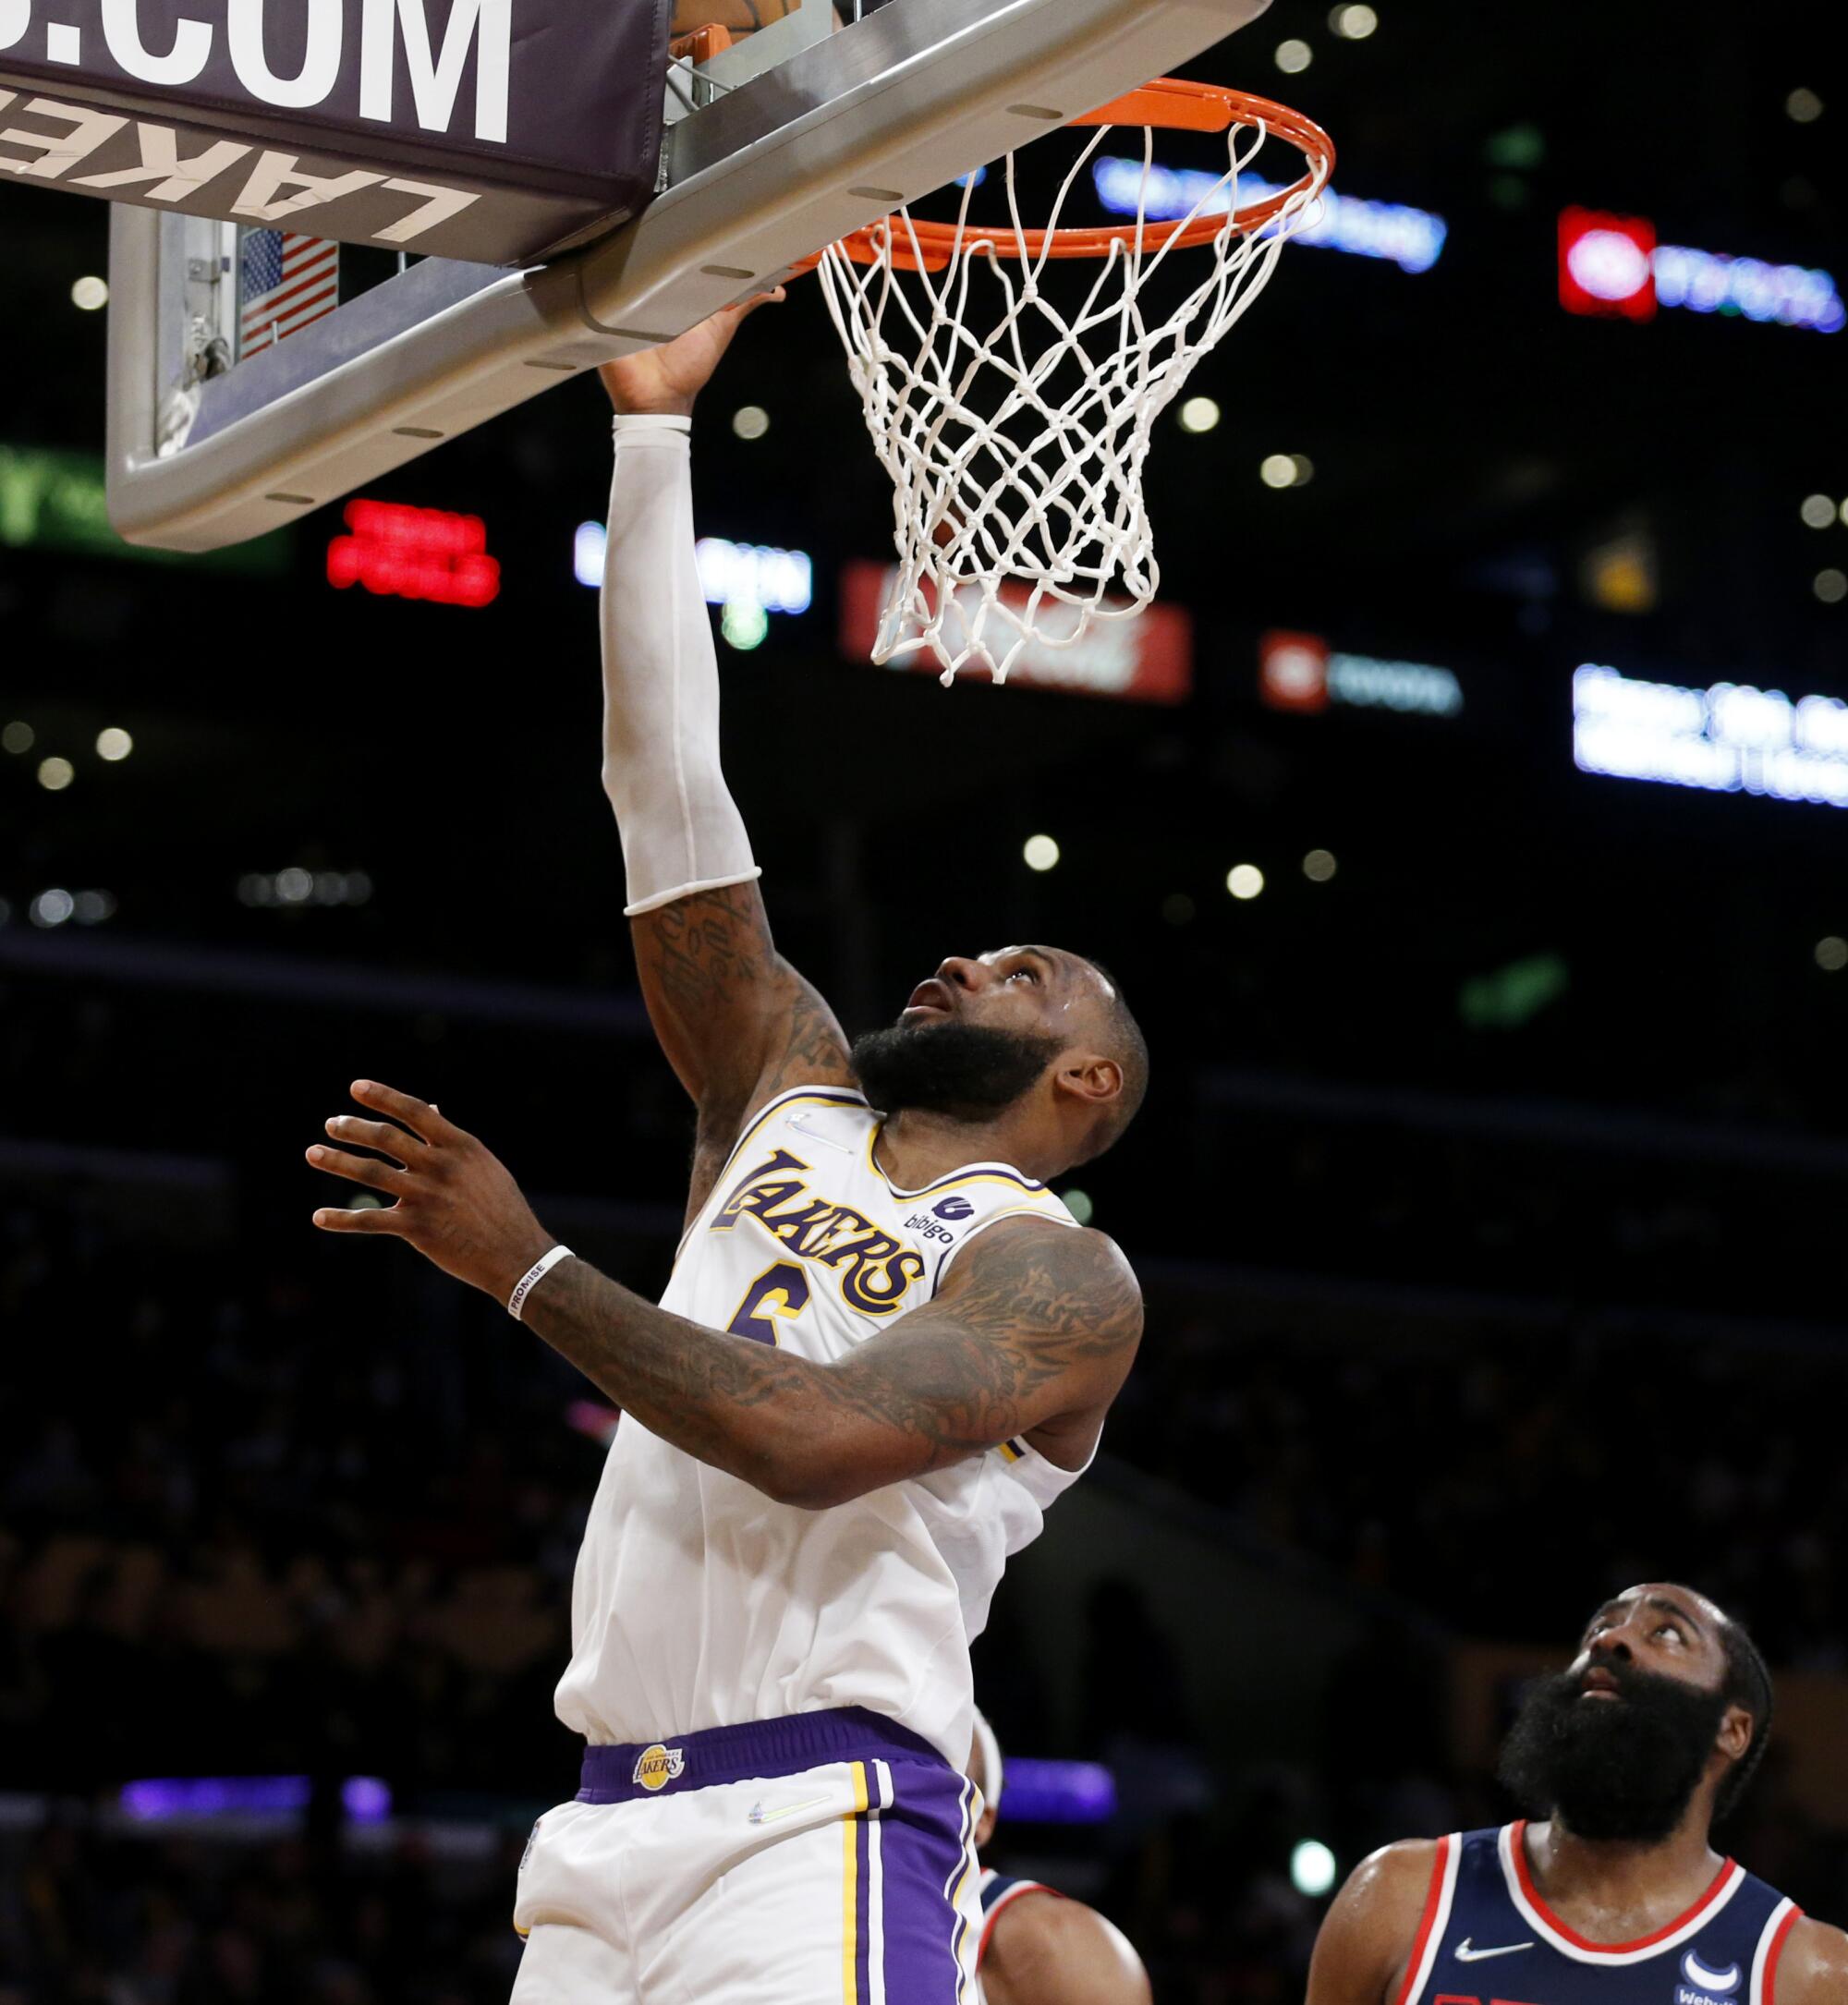 Lakers forward LeBron James scores in front of Brooklyn Nets guard James Harden in the first half.